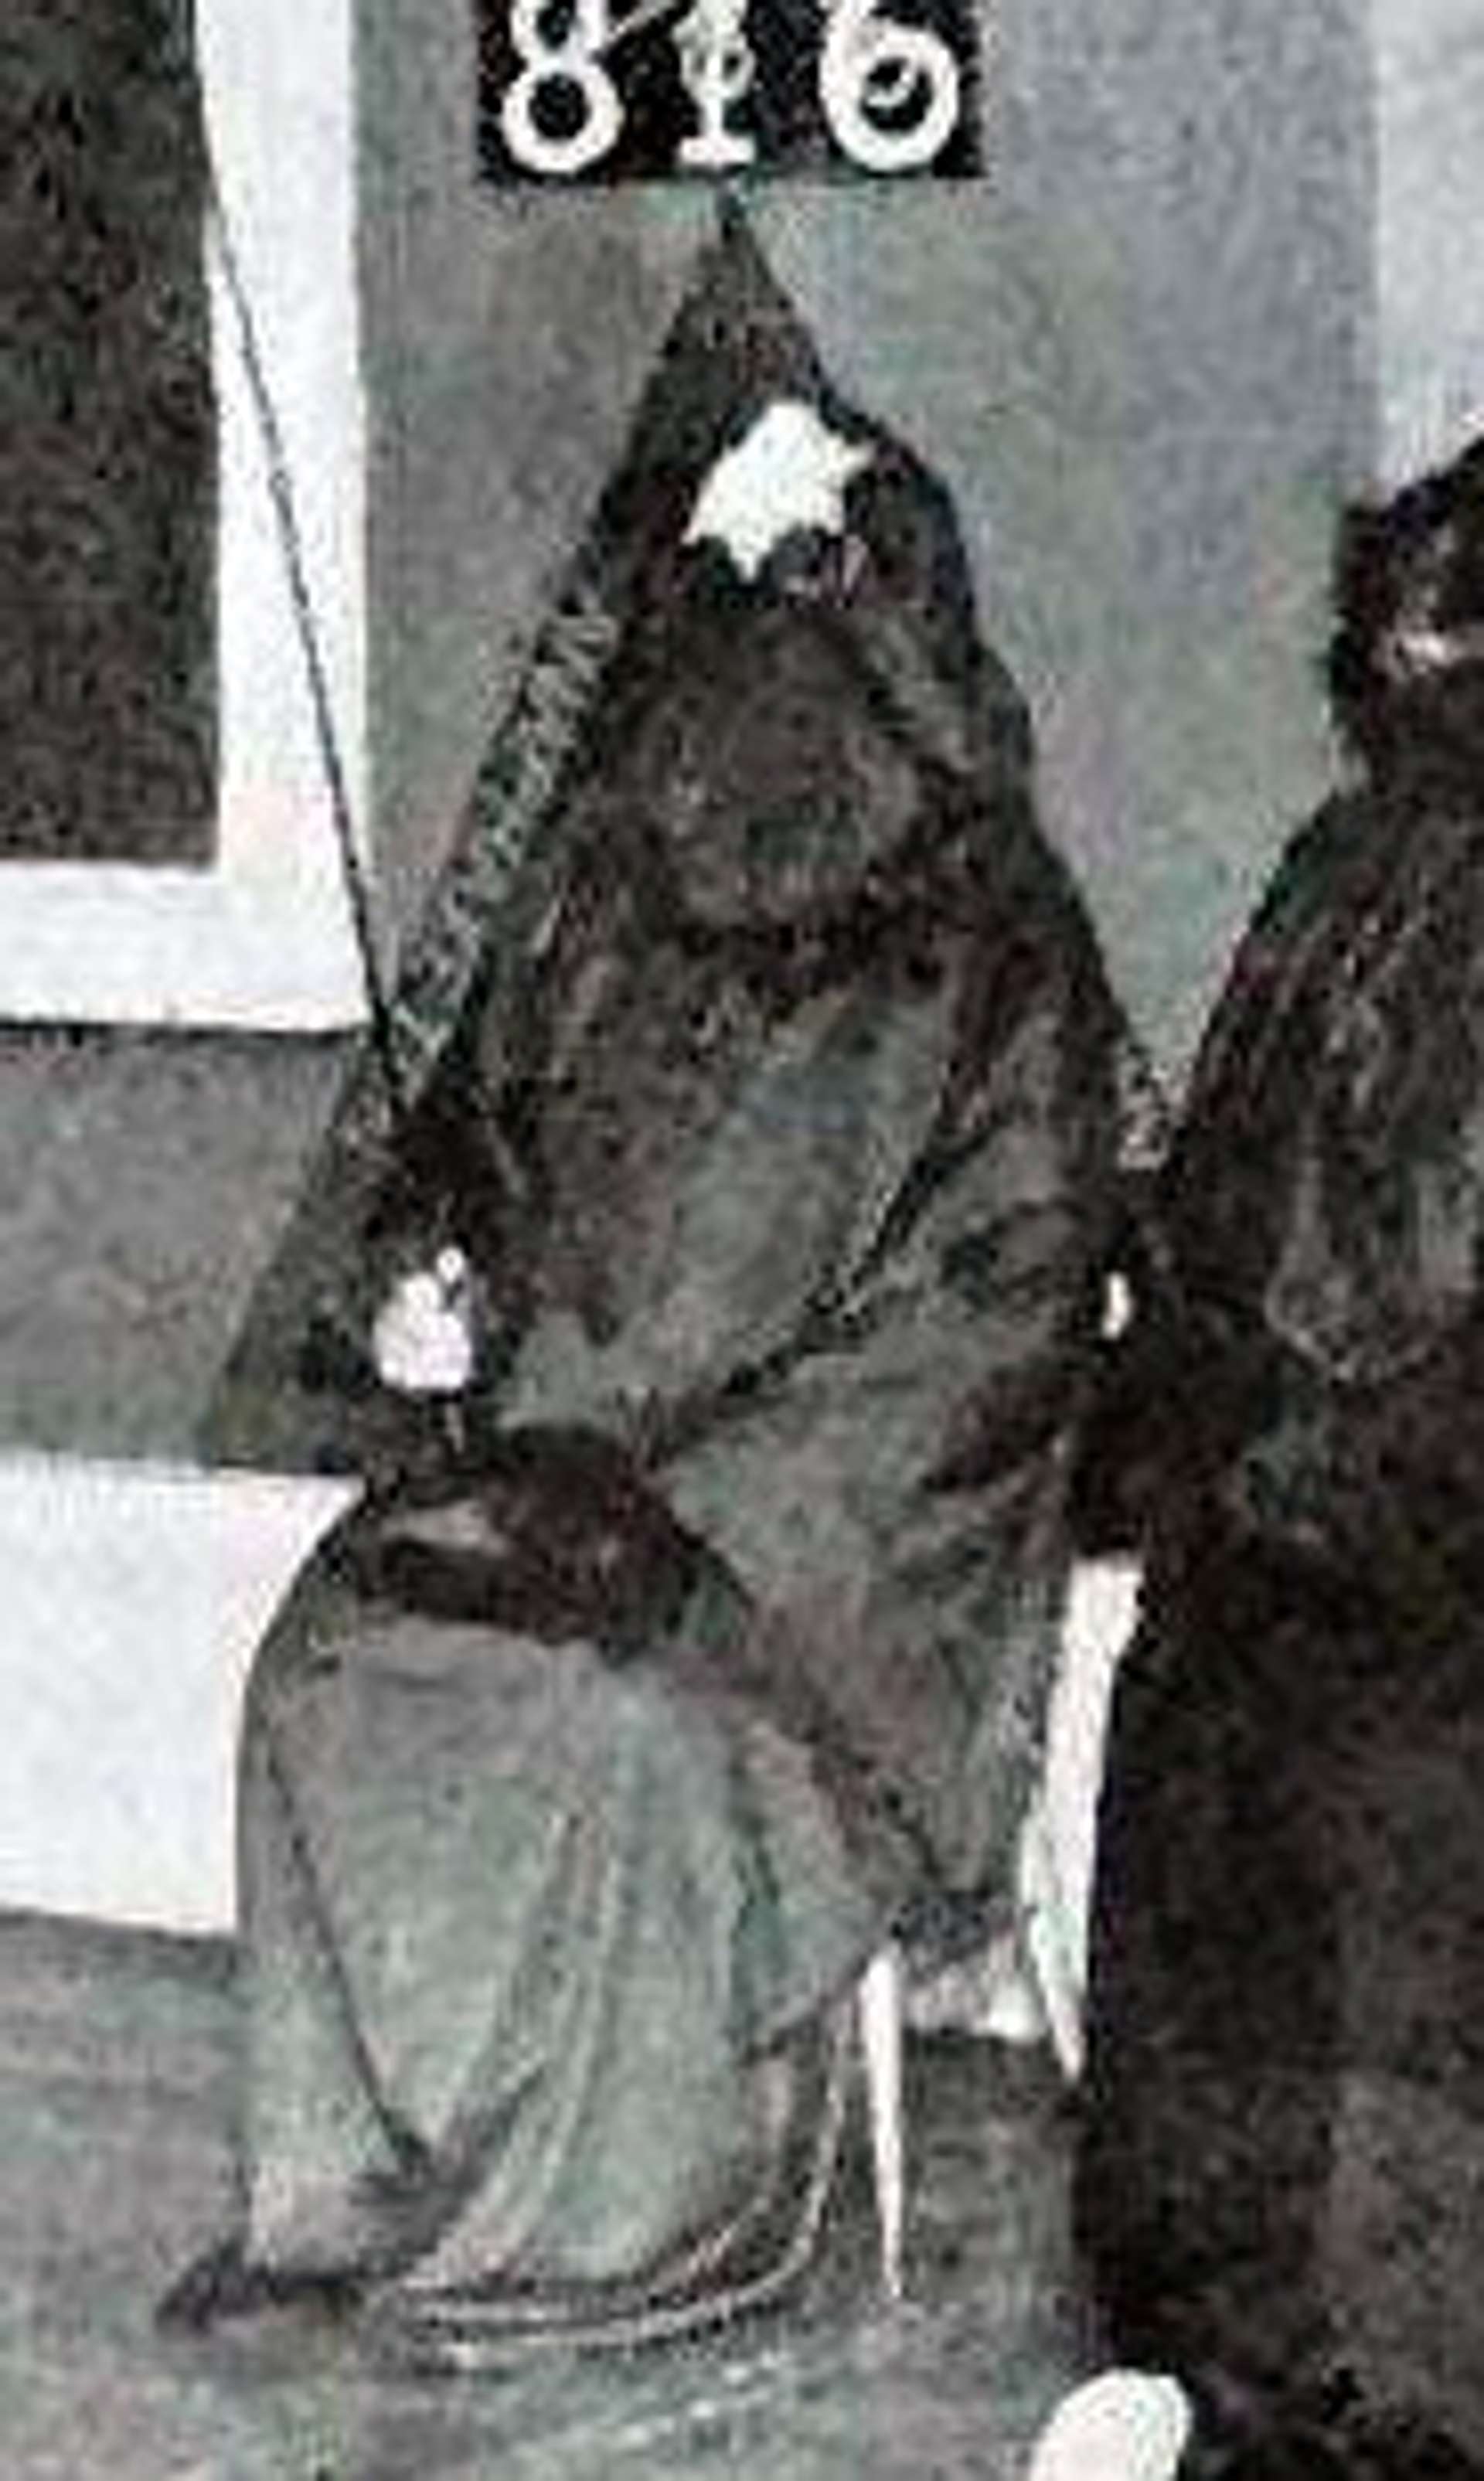 Photo of a person wearing a possible Practicus robe